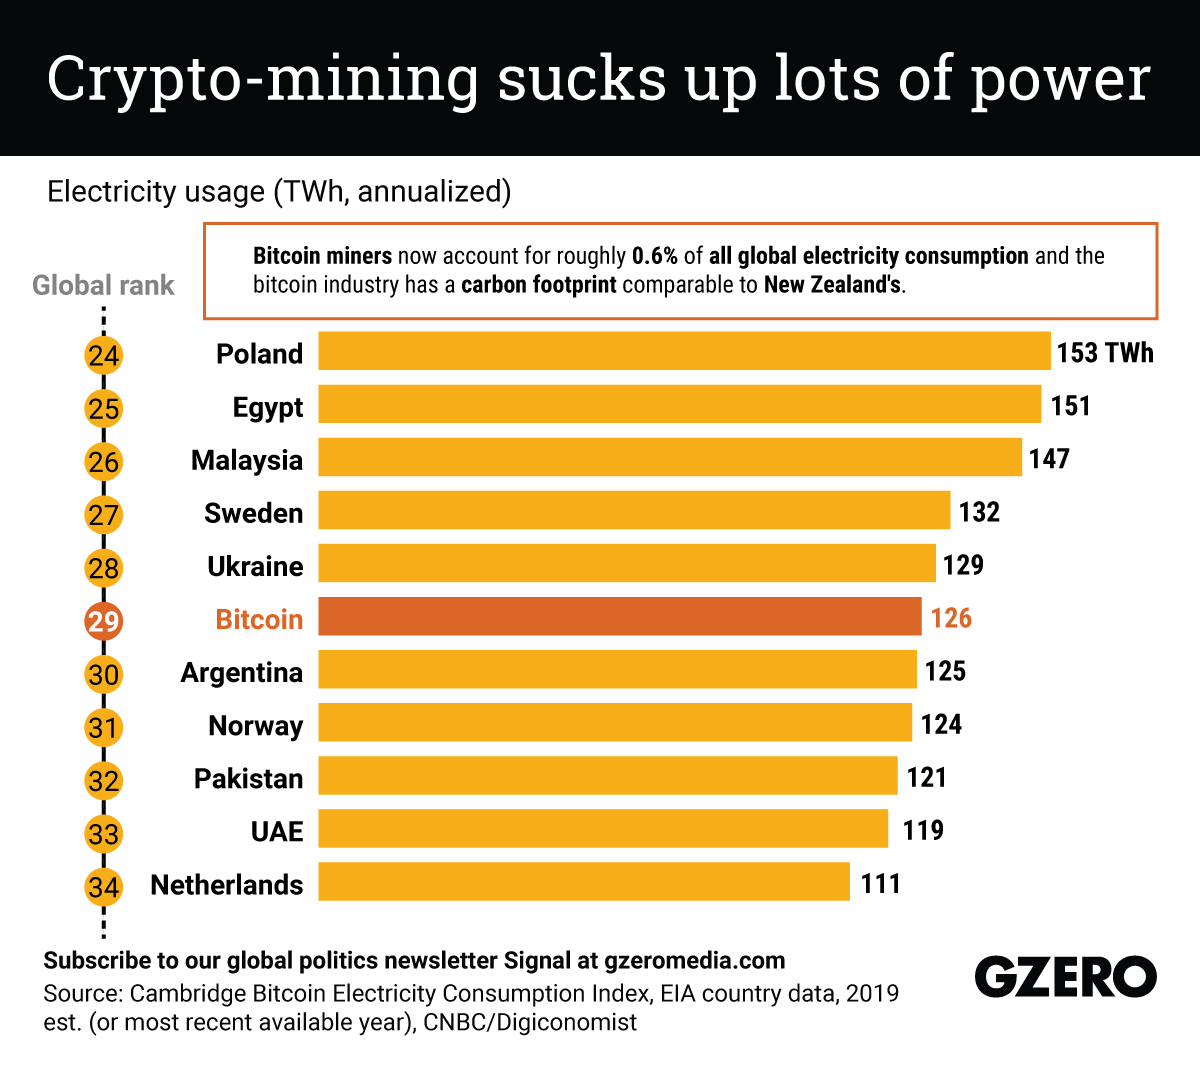 The Graphic Truth: Crypto-mining sucks up lots of power